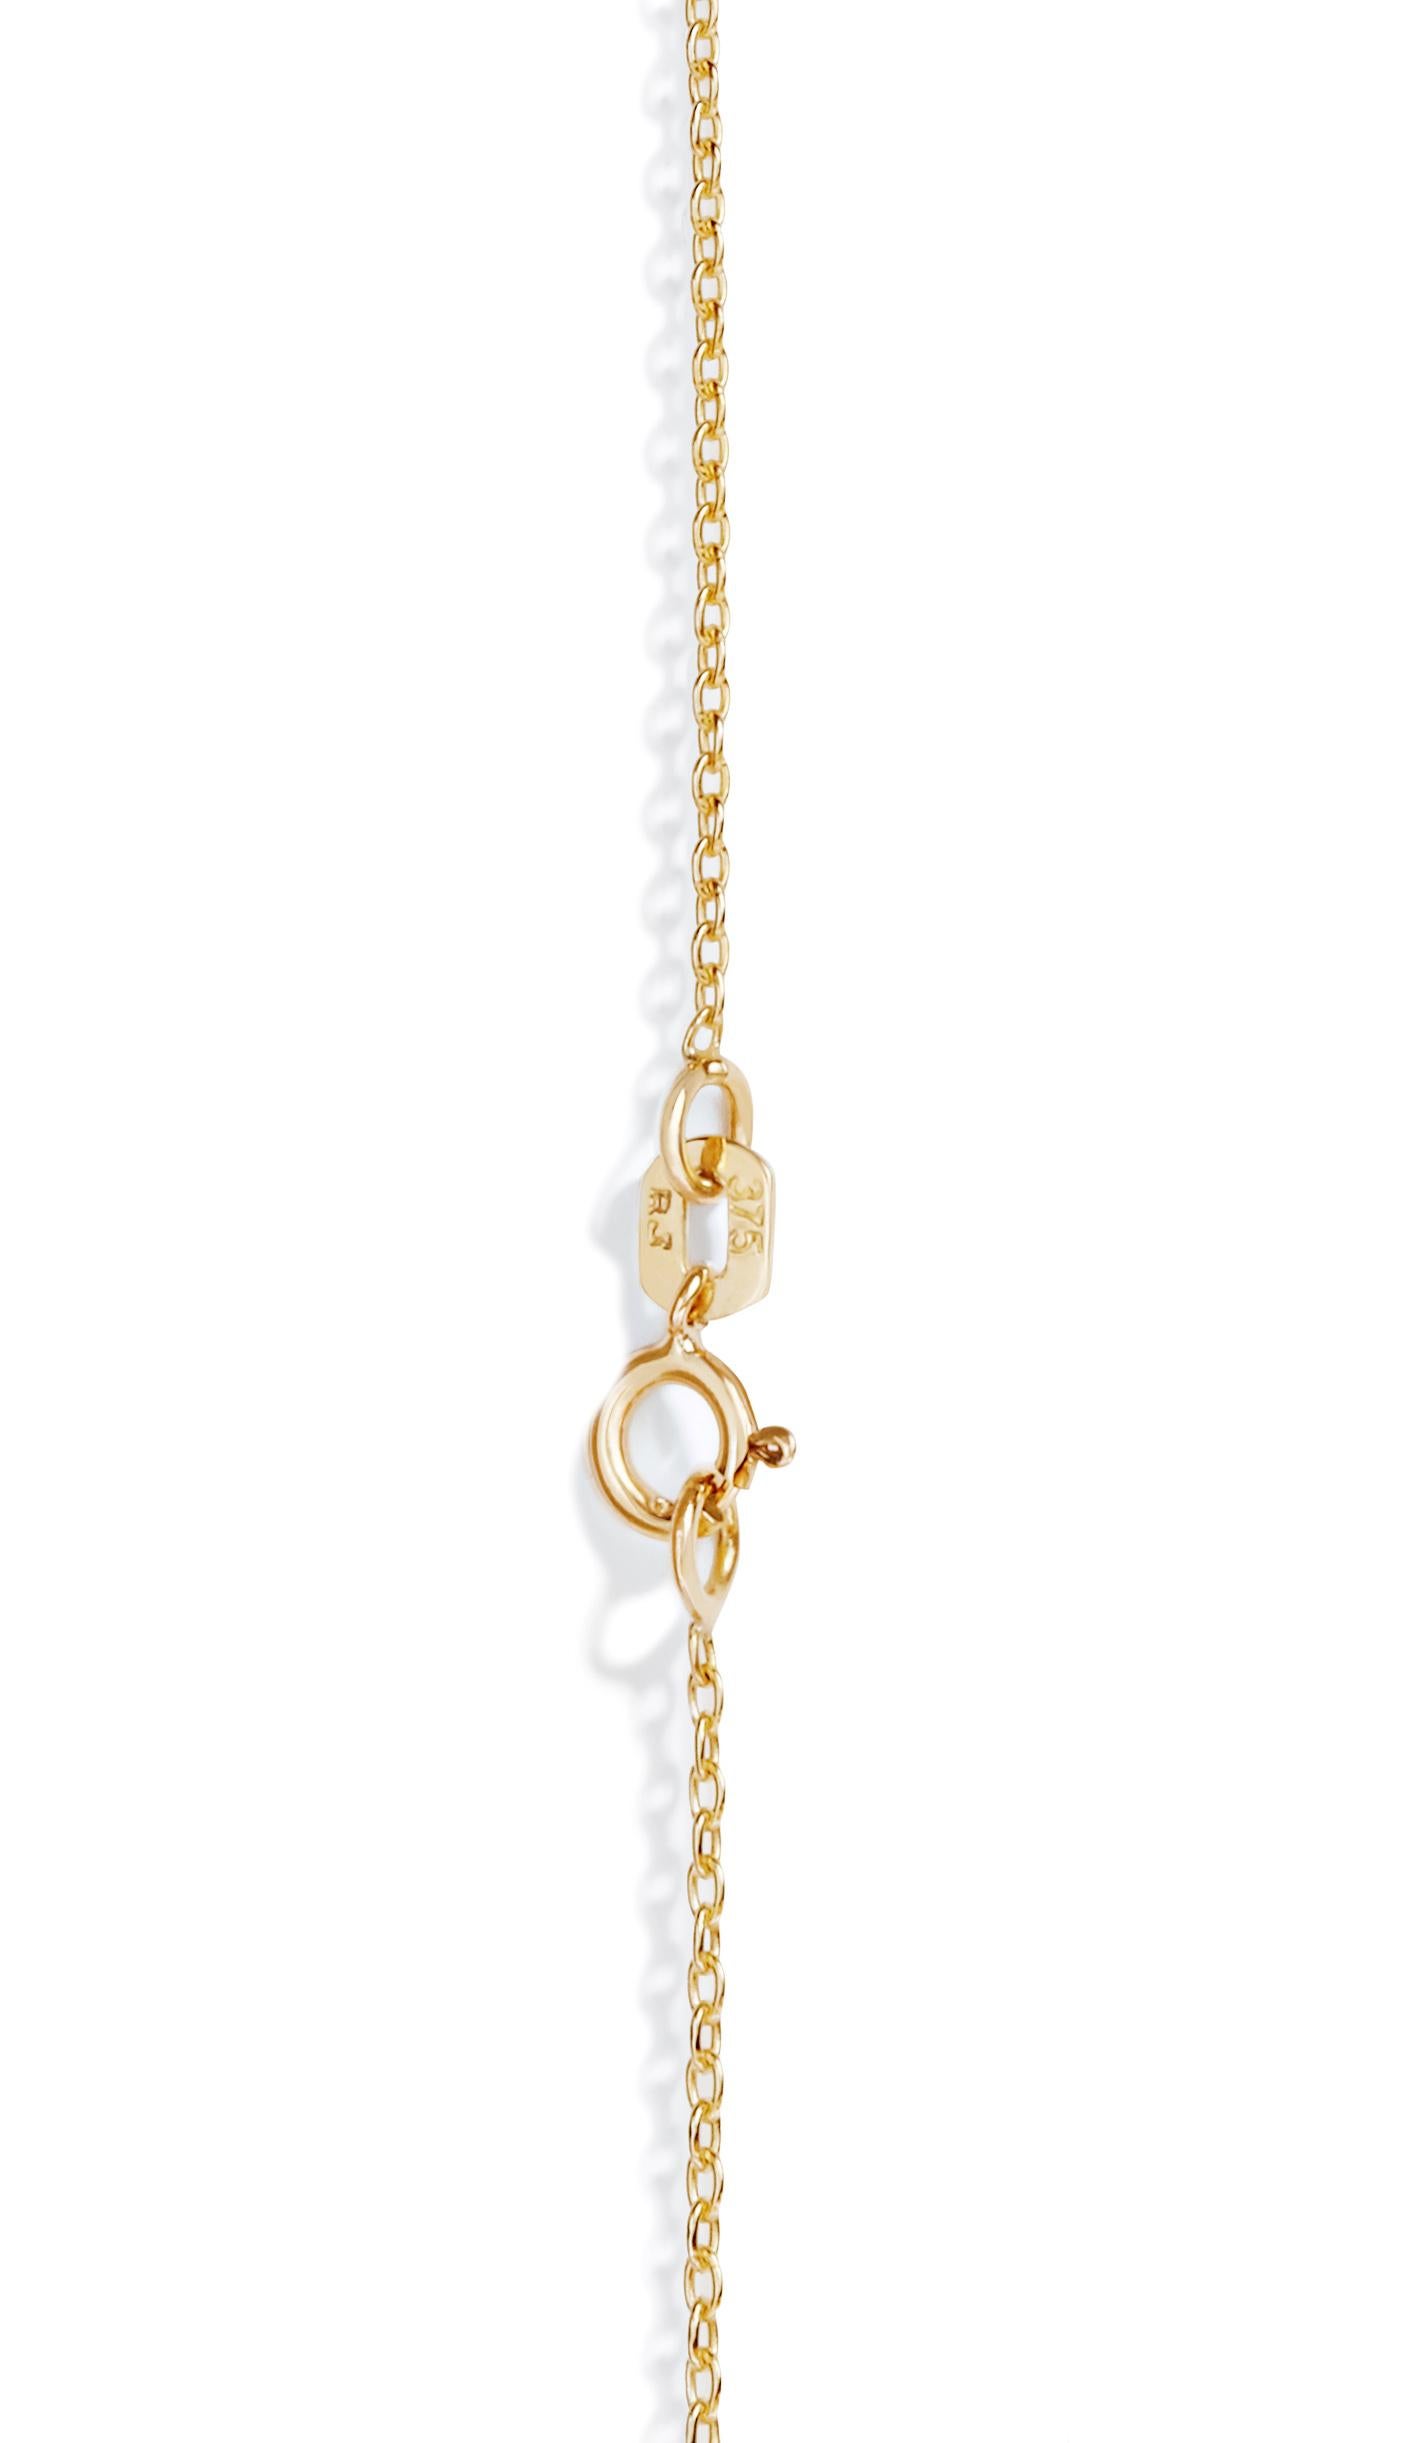 This classic disc pendant necklace crafted in solid 9-carat gold features our signature Paper texture.  The pendant is 1 1/4 inches in diameter and comes on a 20-inch chain in solid 9-carat gold.  The reverse of the pendant can be engraved with